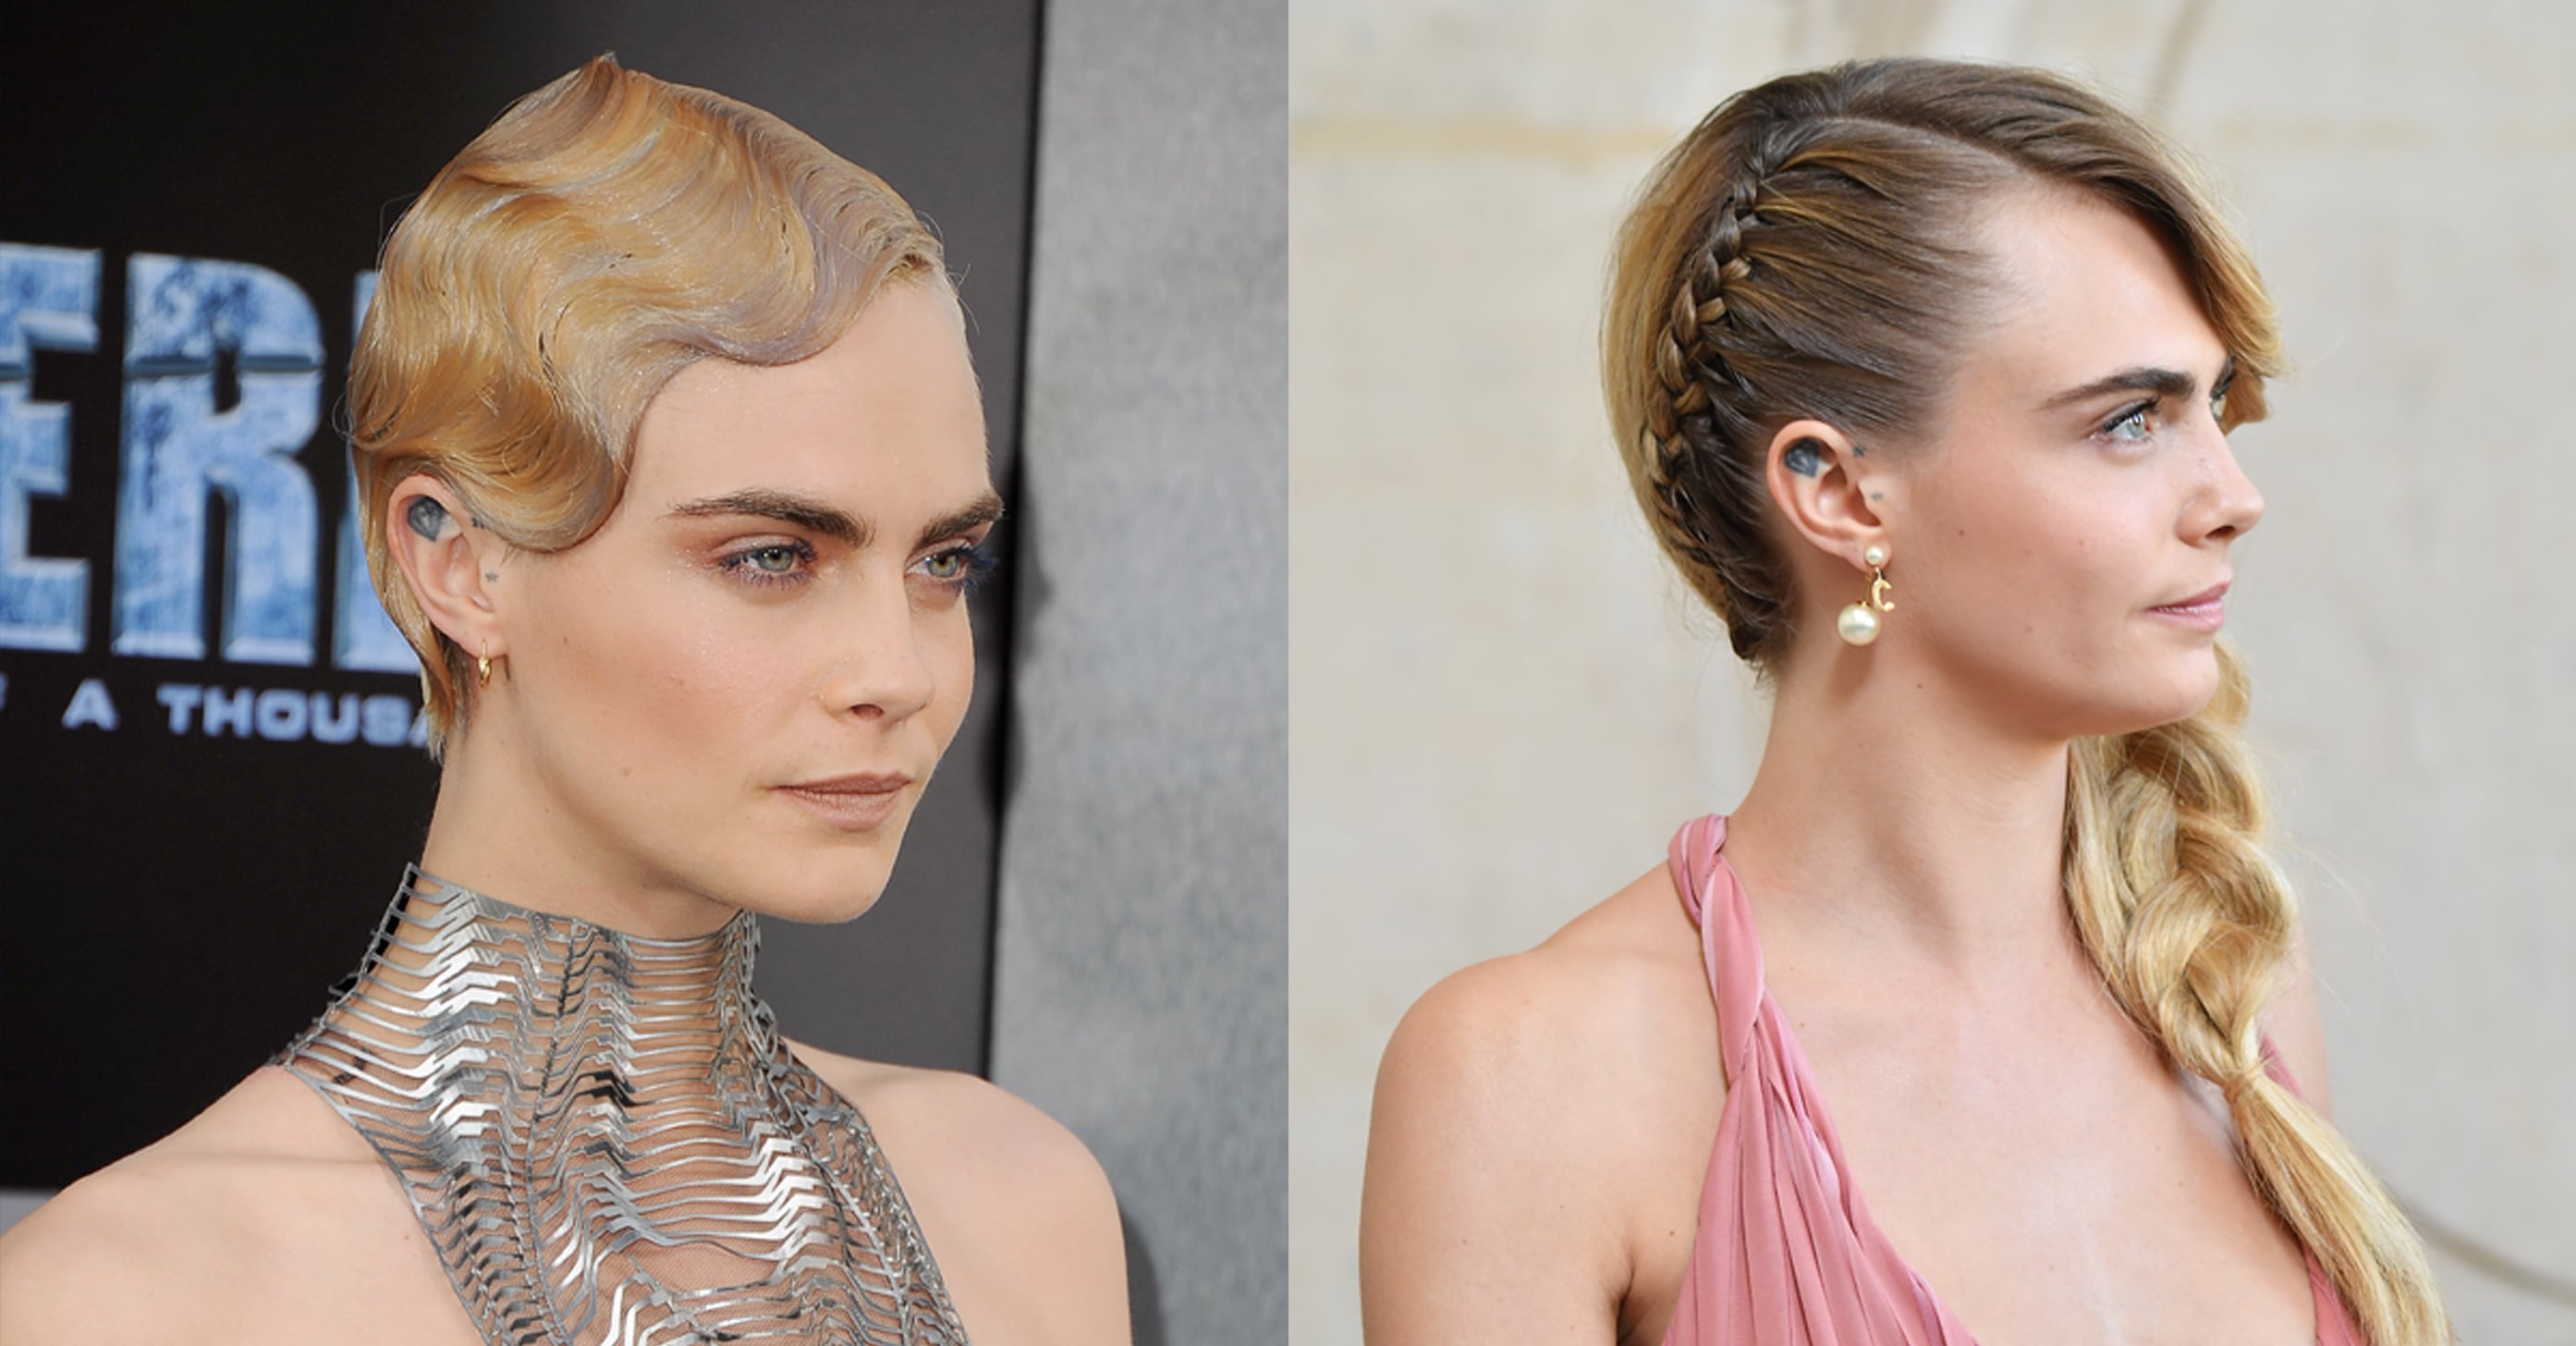 How to wear hair accessories like a grown up